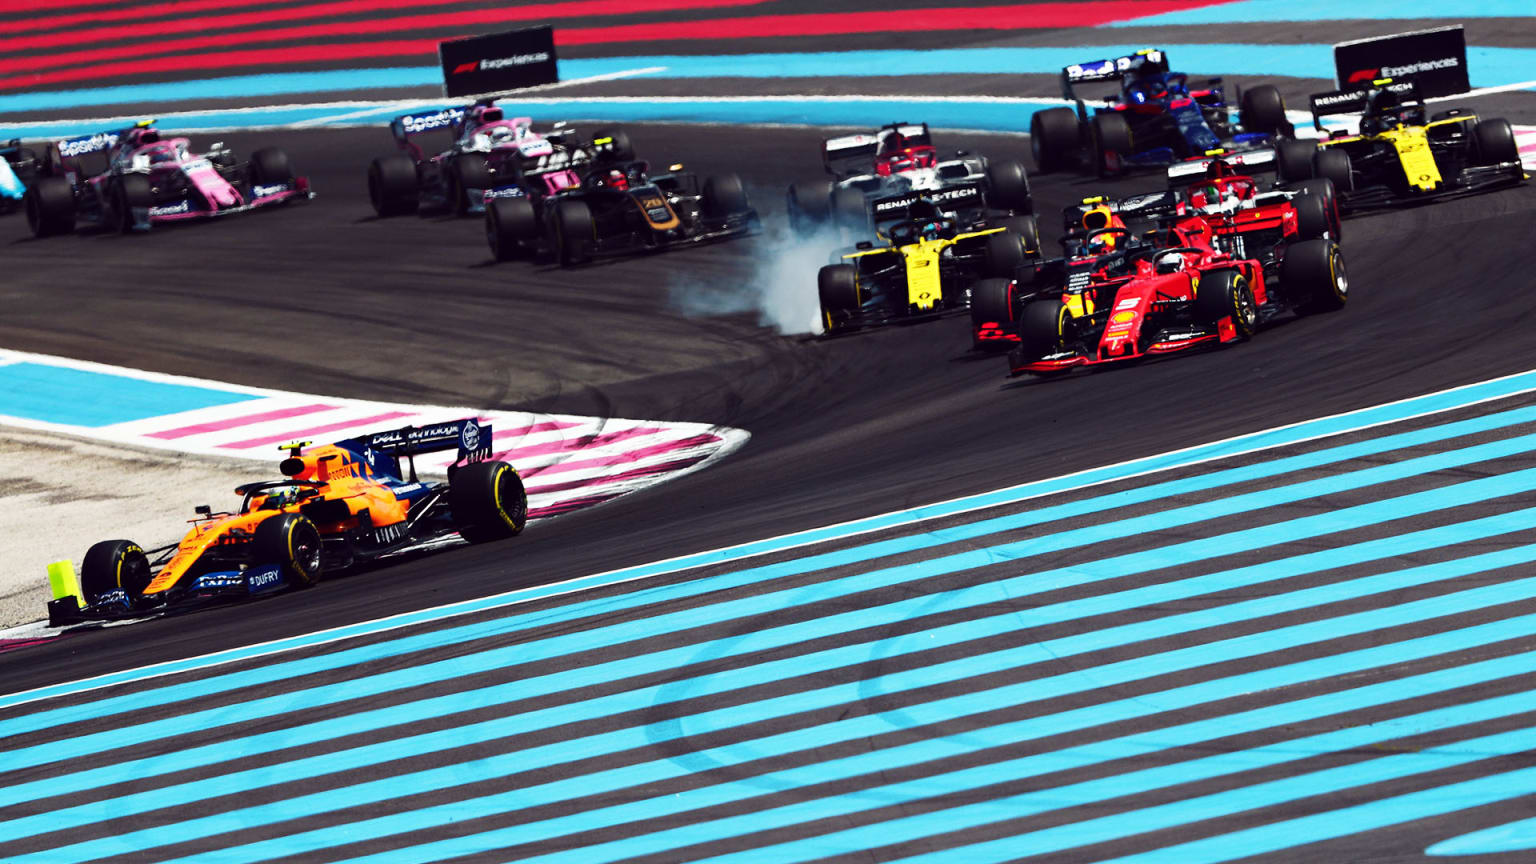 France to 'Return' to F1 World Championship in 2018